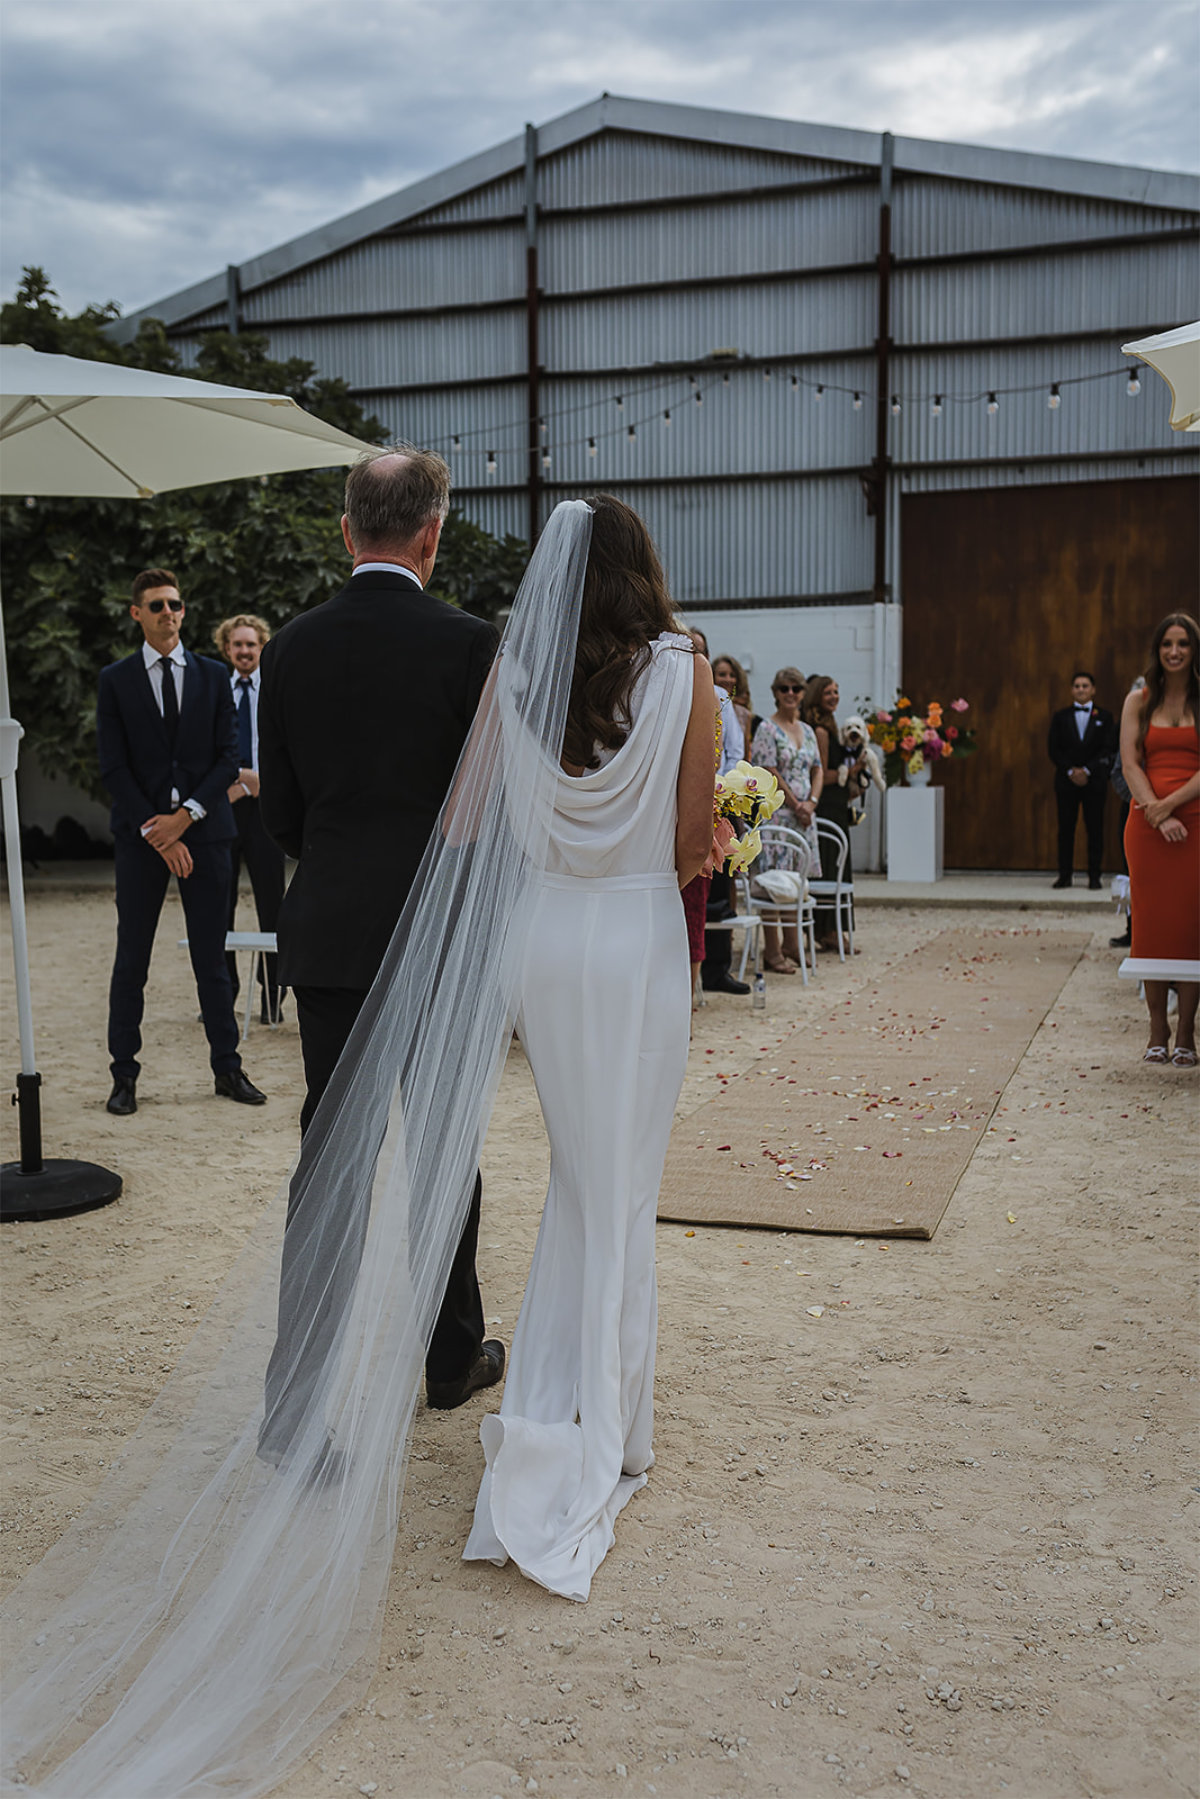 Assembly Yard wedding for Emily and Dann. Photographed by Christopher Millen.